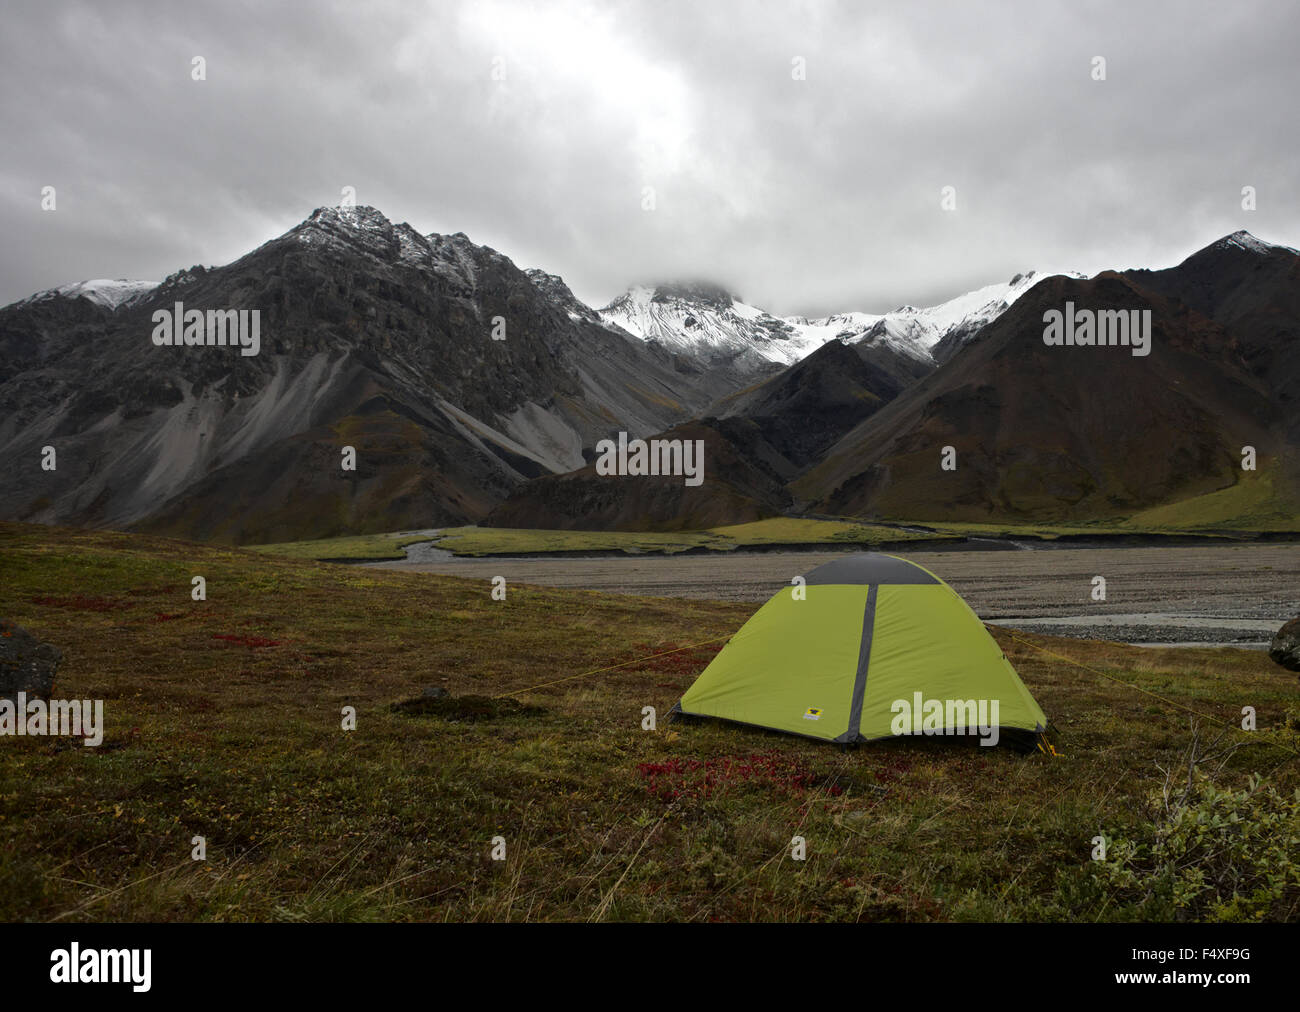 One of the best camp sites around. Stock Photo